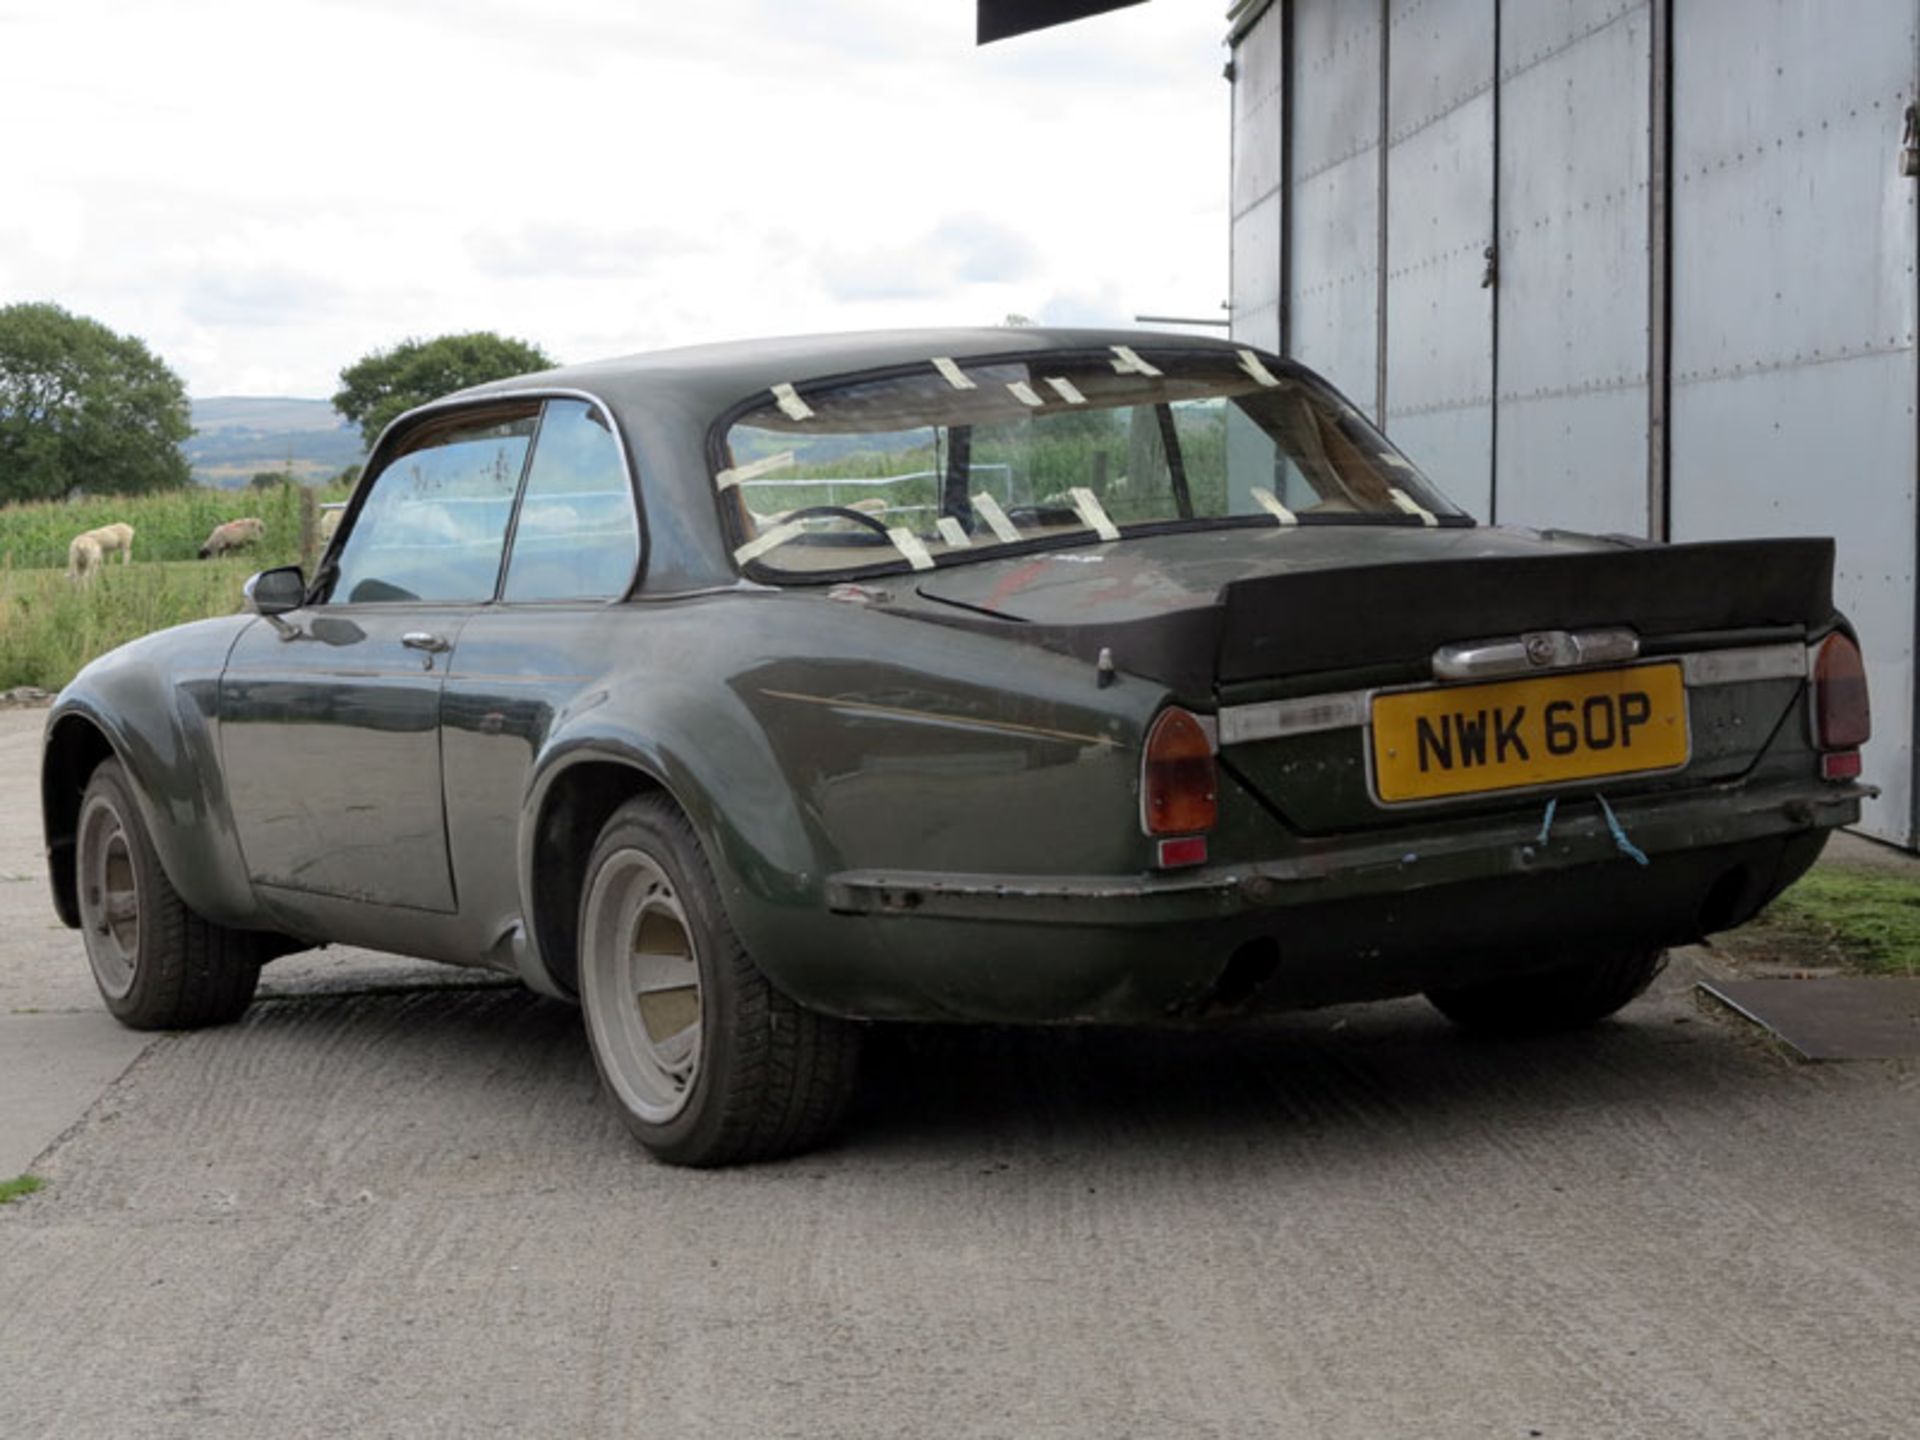 - John Steed's famous mount in 'The New Avengers' TV series

- The eighth XJ-C 12 made and - Image 5 of 12